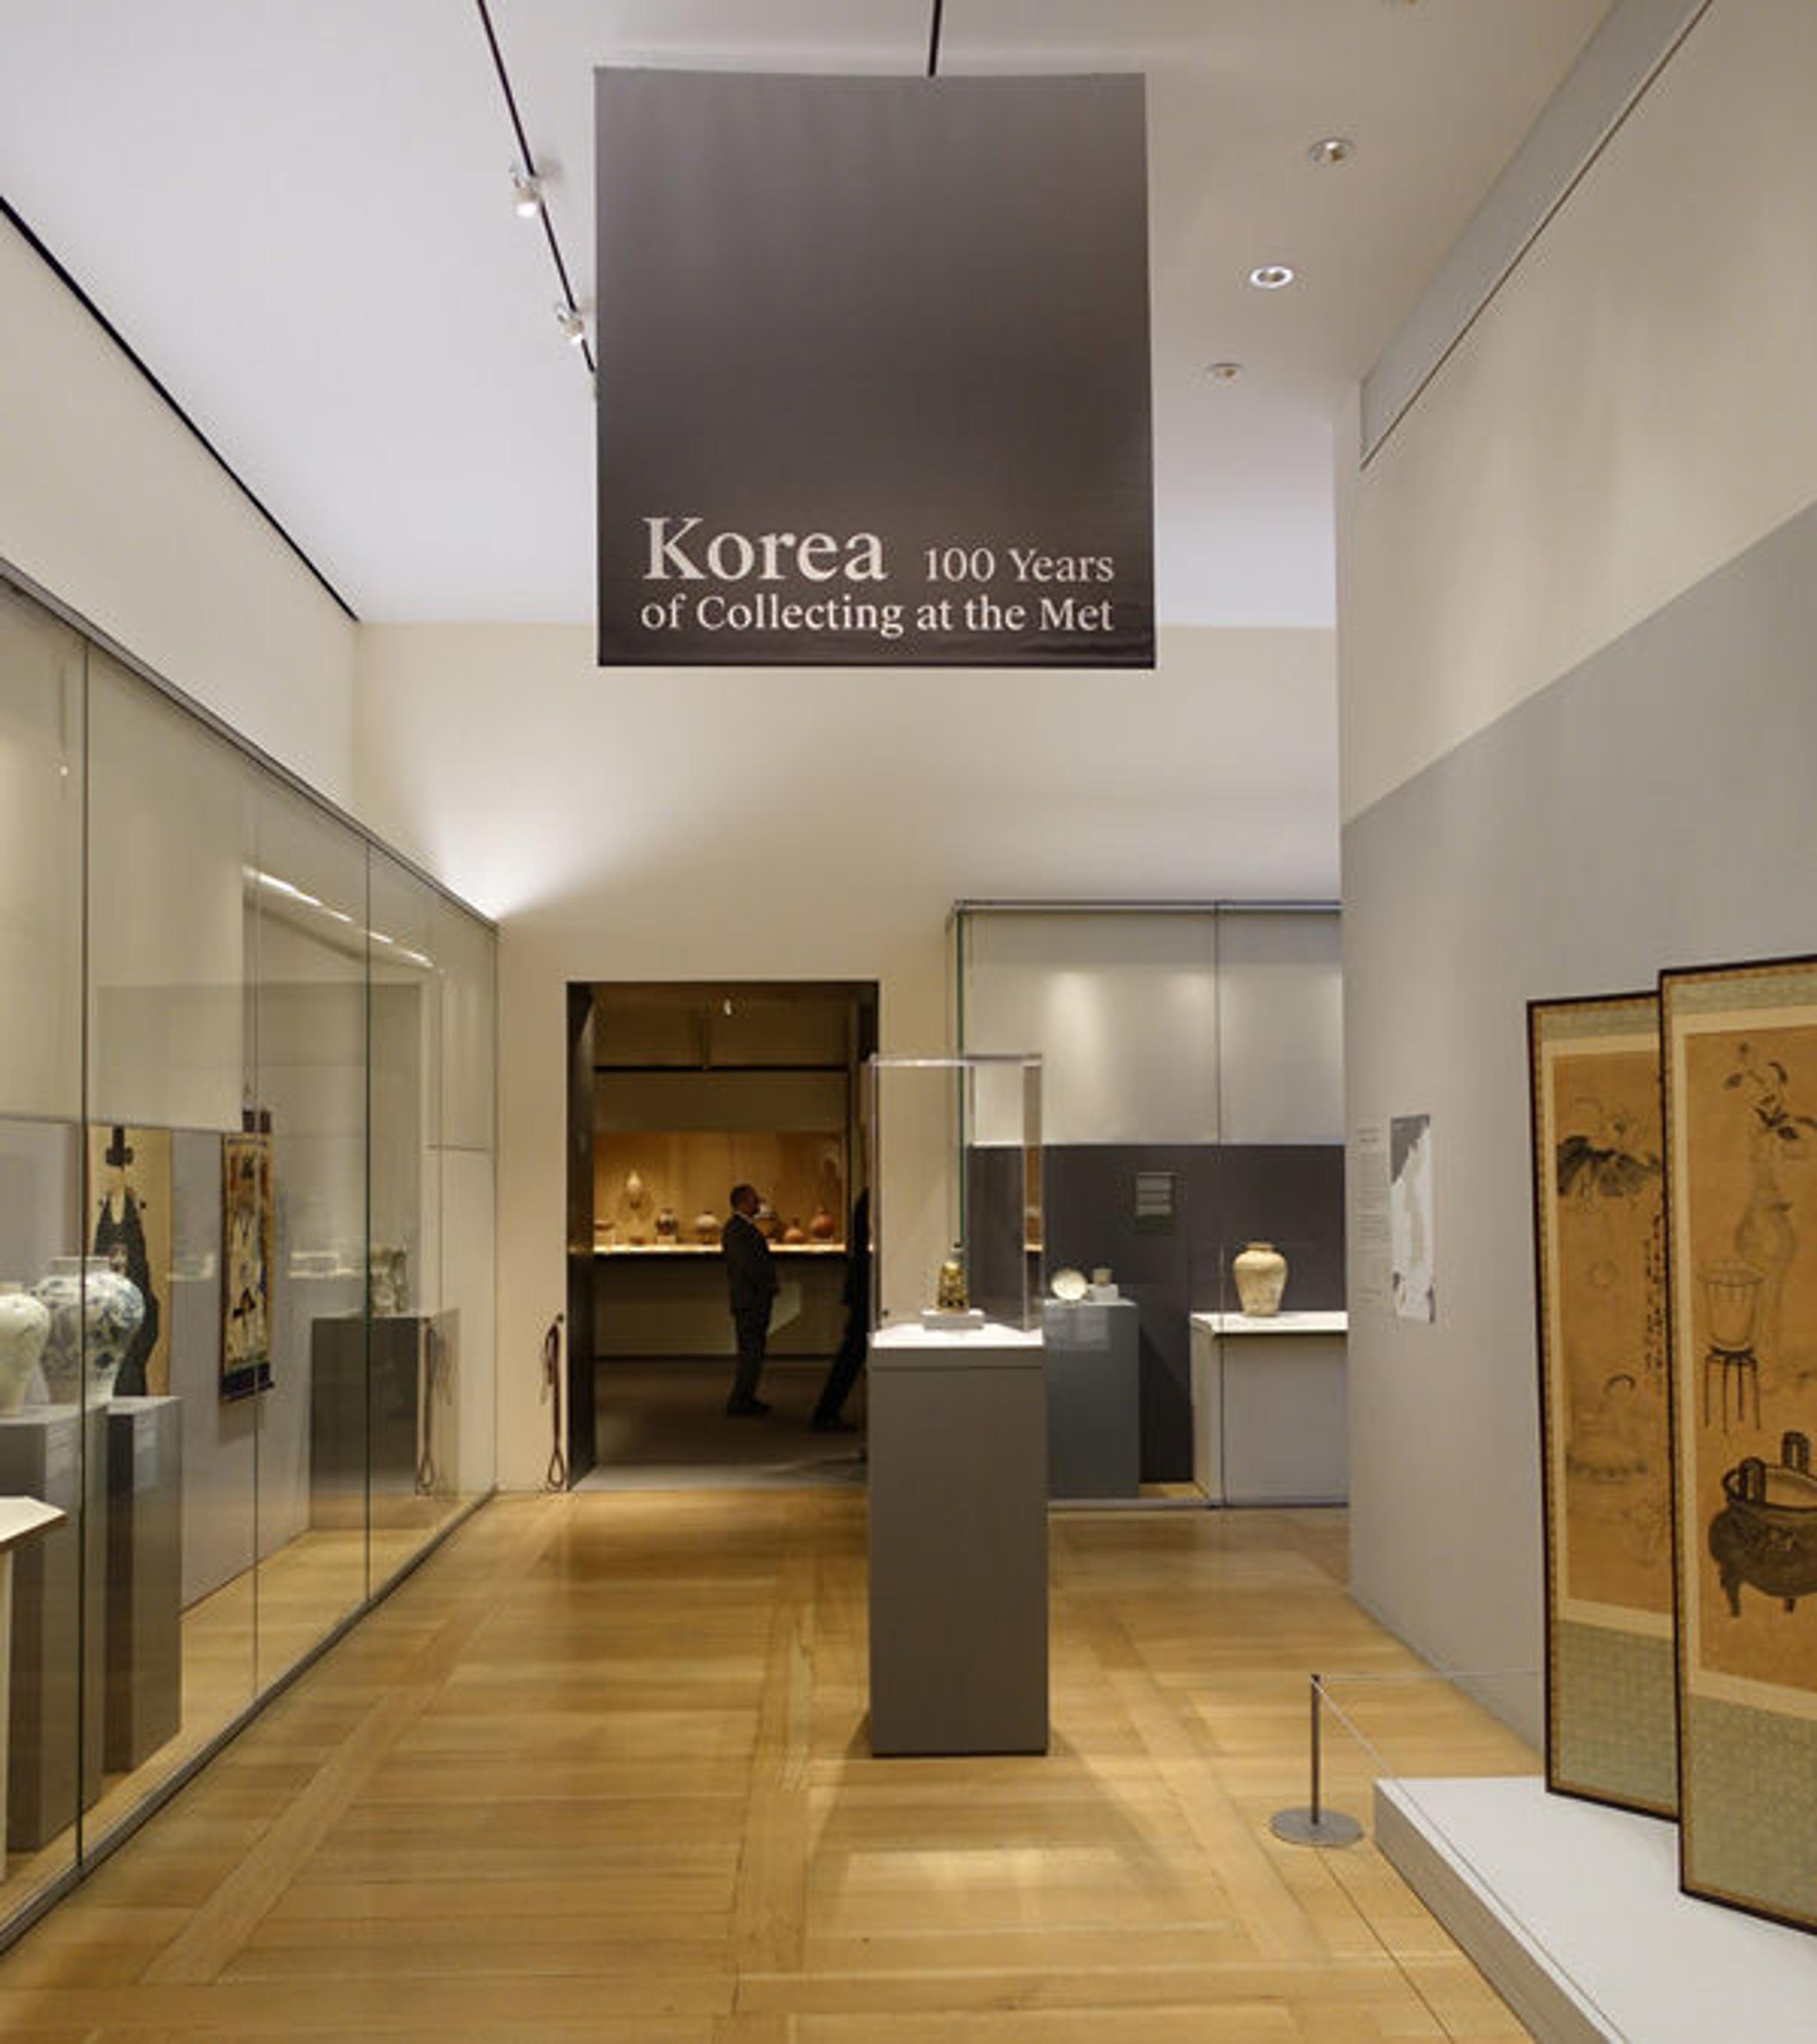 Korea: 100 Years of Collecting at the Met, as installed in gallery 233